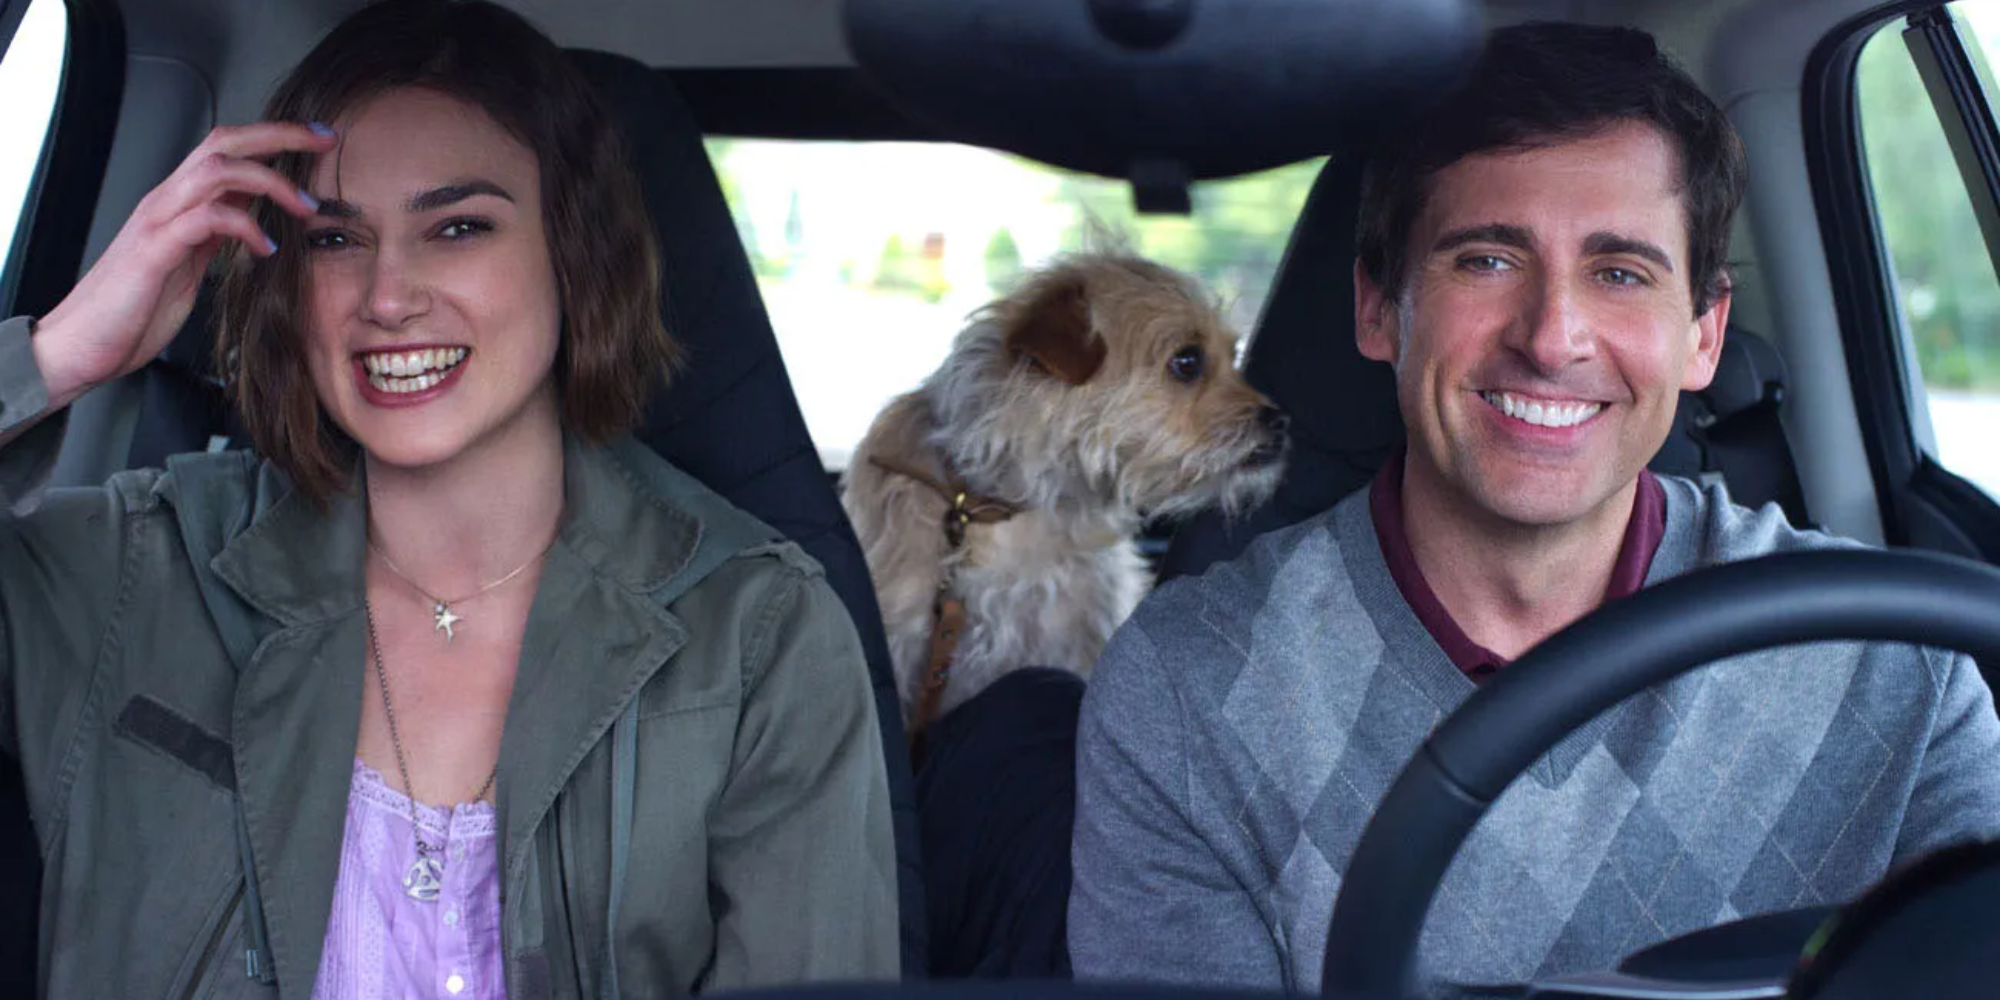 A young woman and a man inside a car laughing in the film Seeking A Friend For The End Of The World